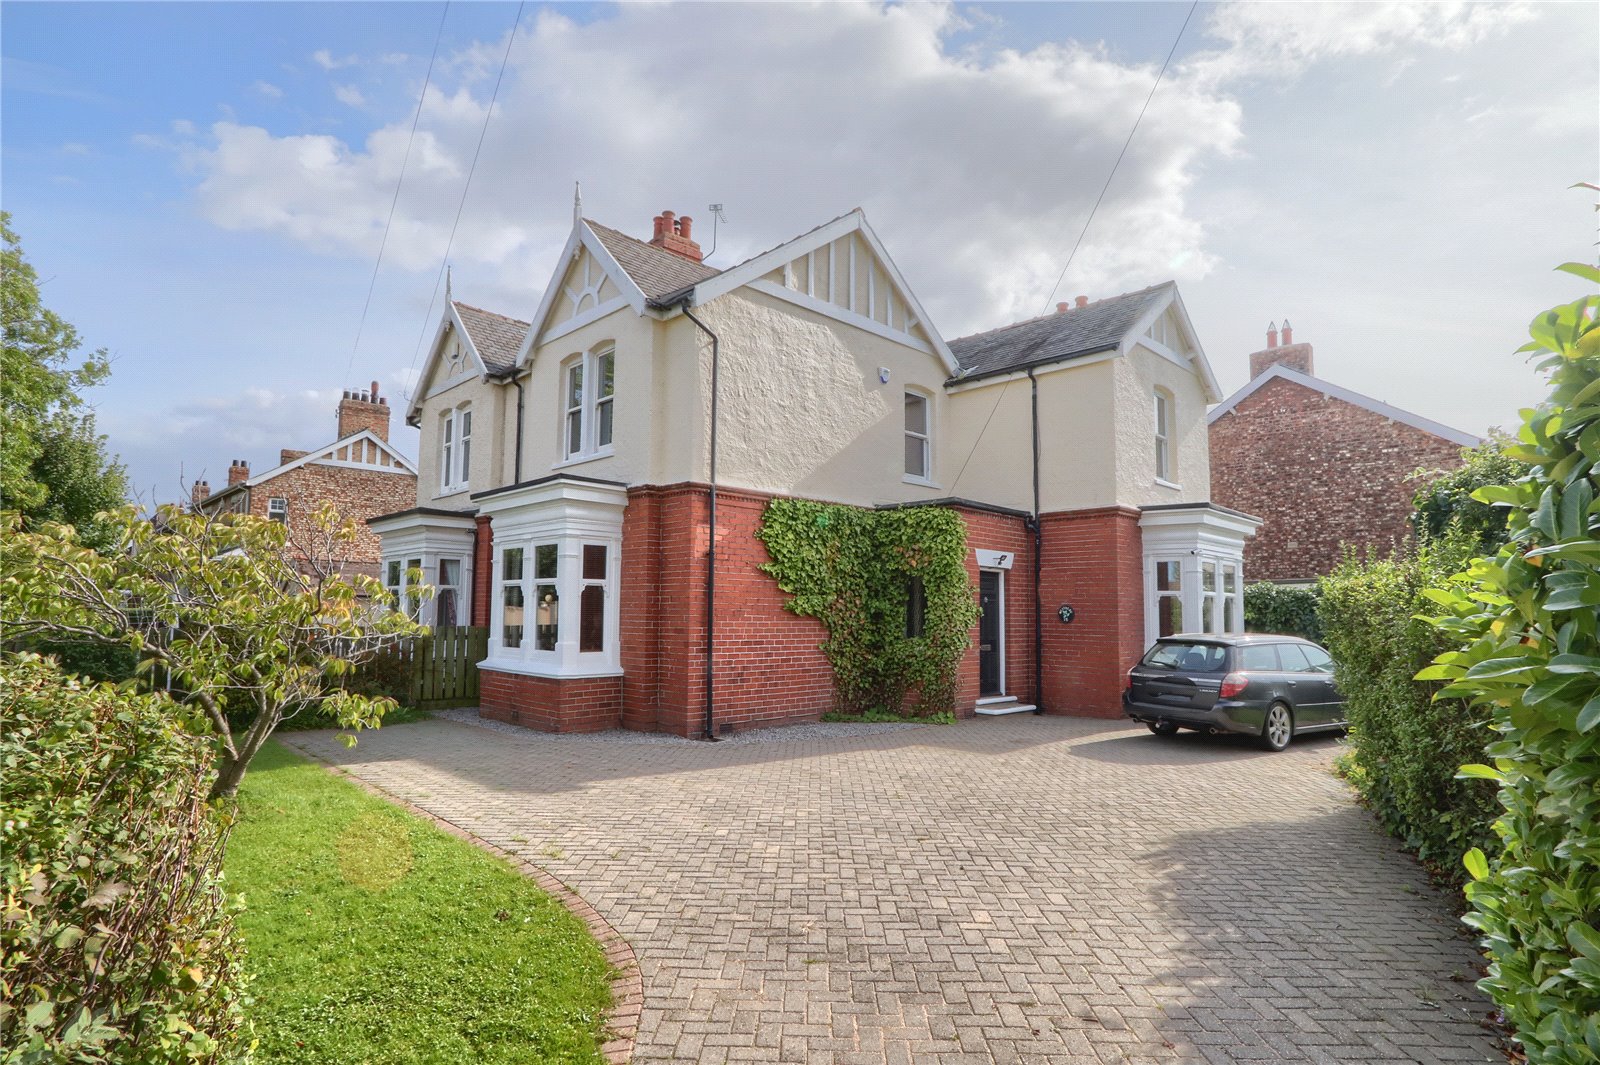 3 bed house for sale - Property Image 1